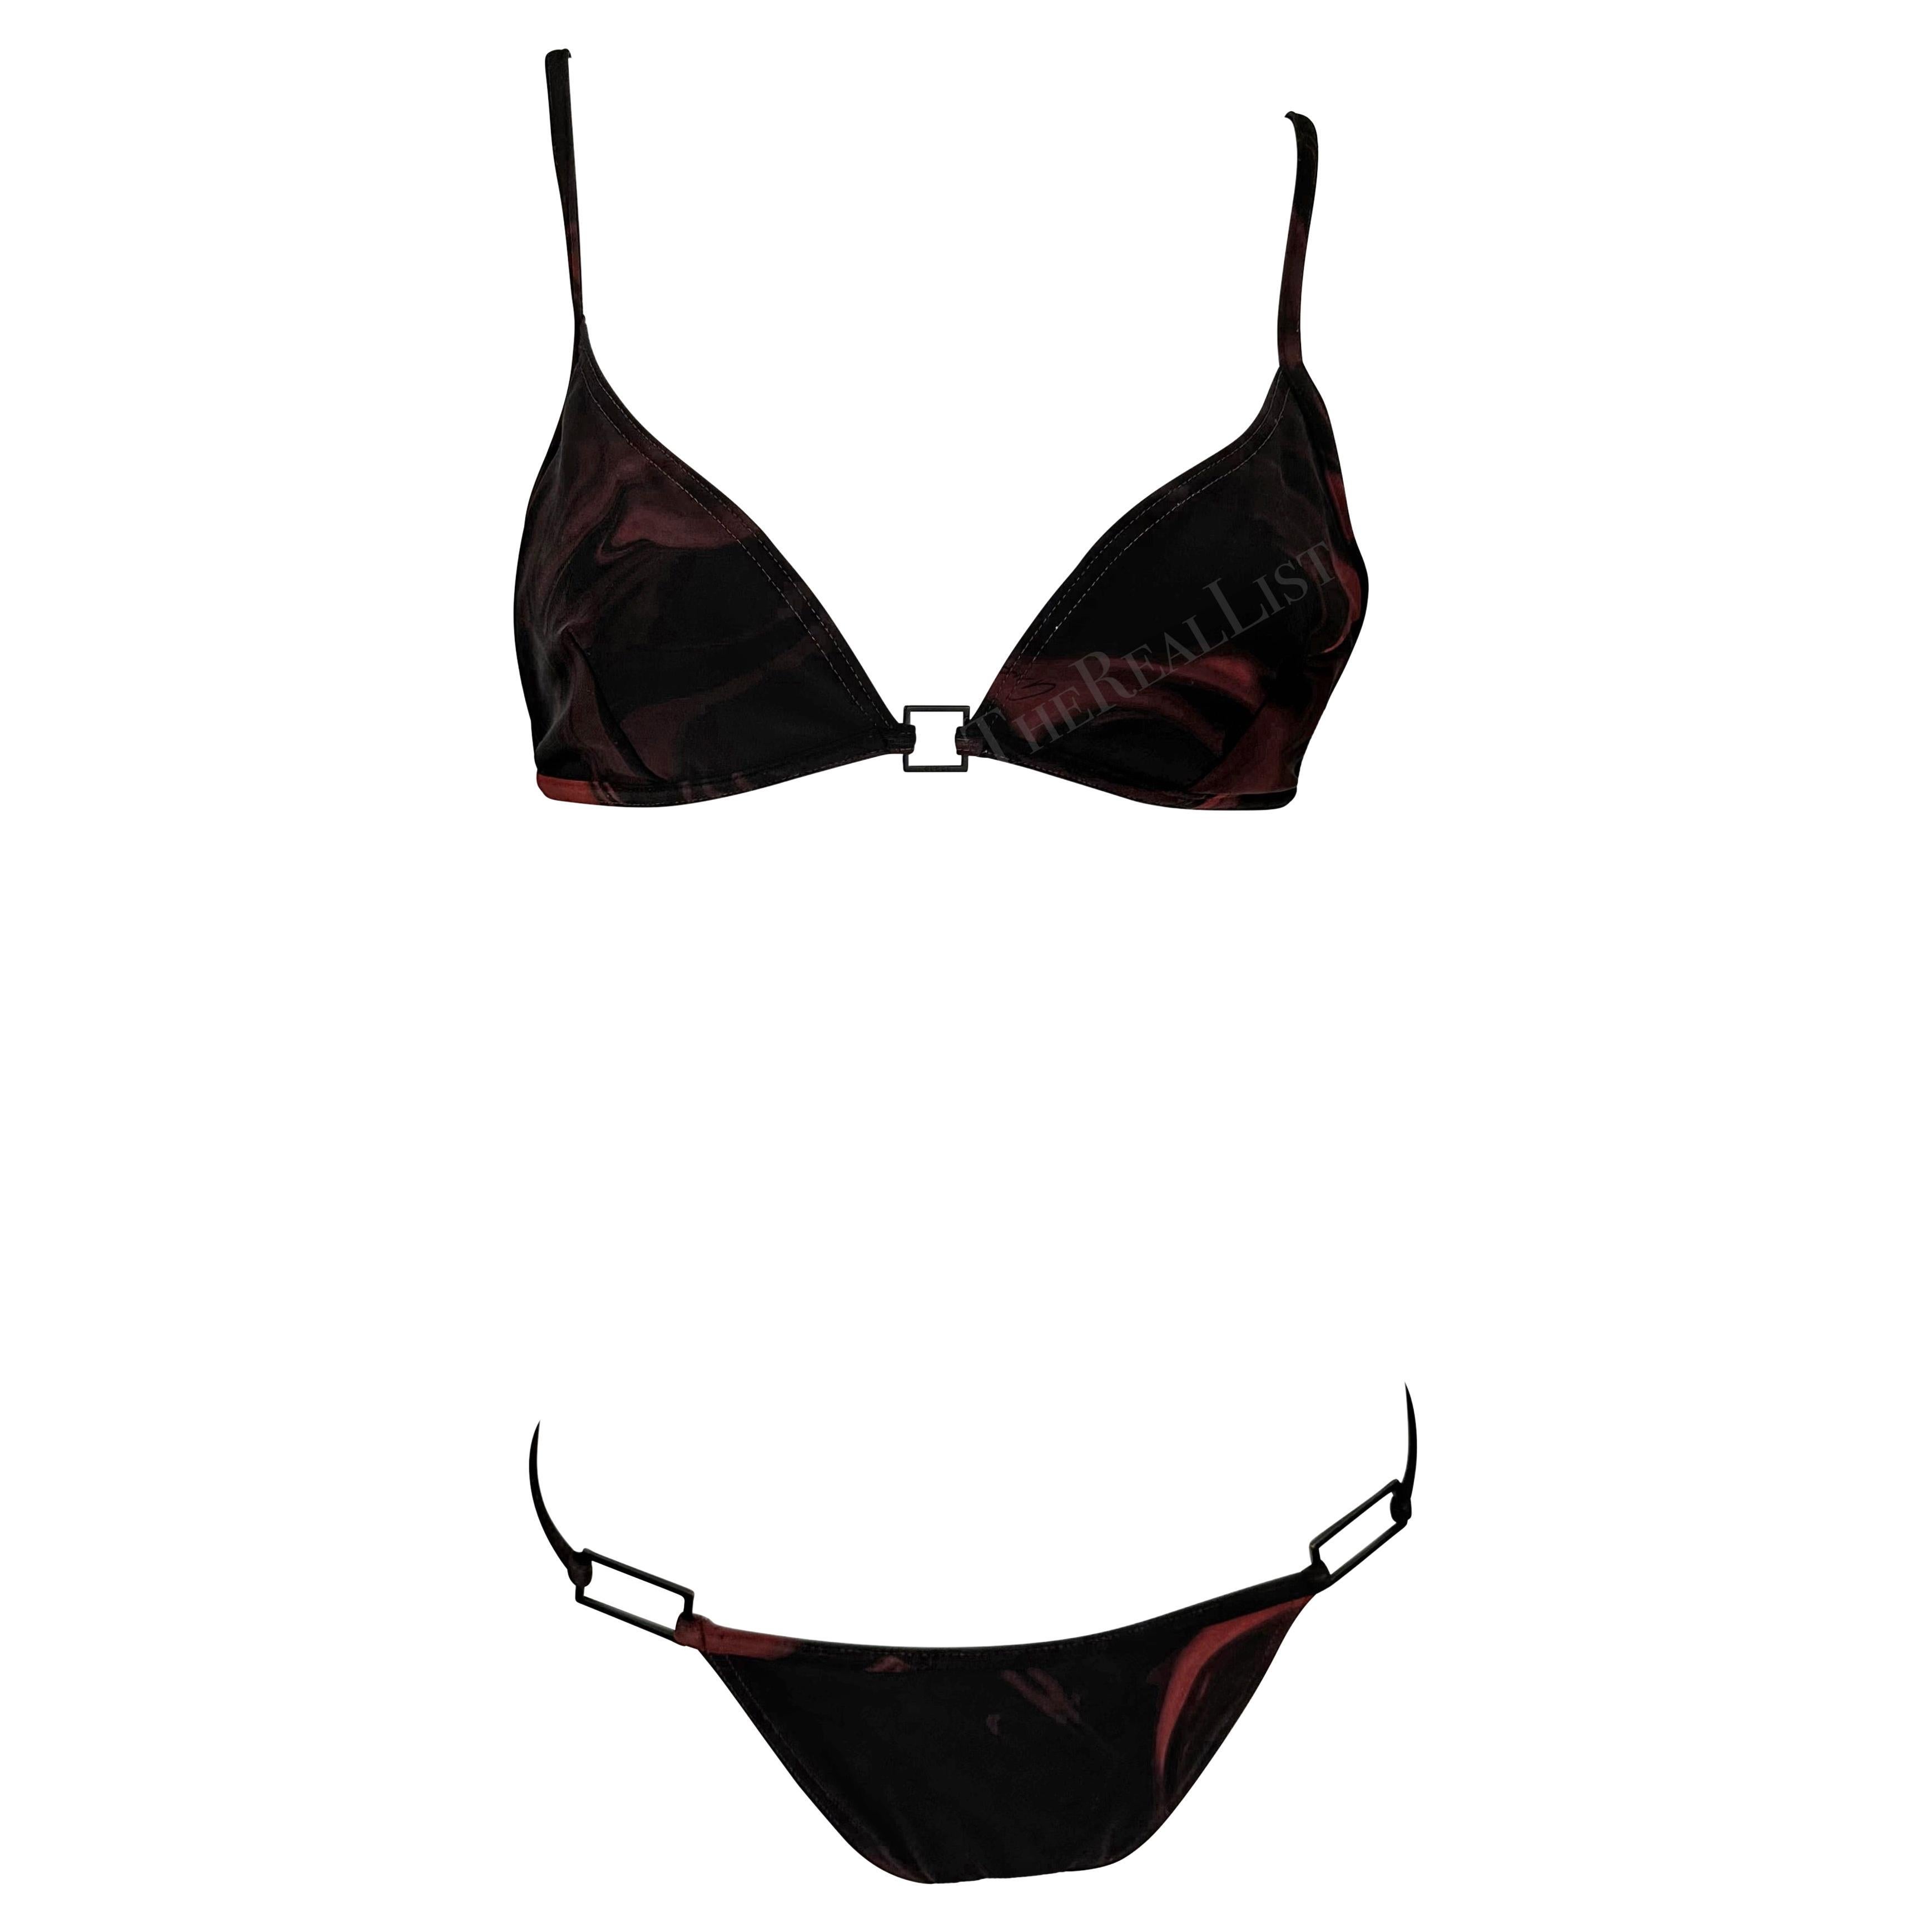 S/S 2001 Gucci by Tom Ford Black Red Magma Print Logo Buckle Bikini Two-Piece For Sale